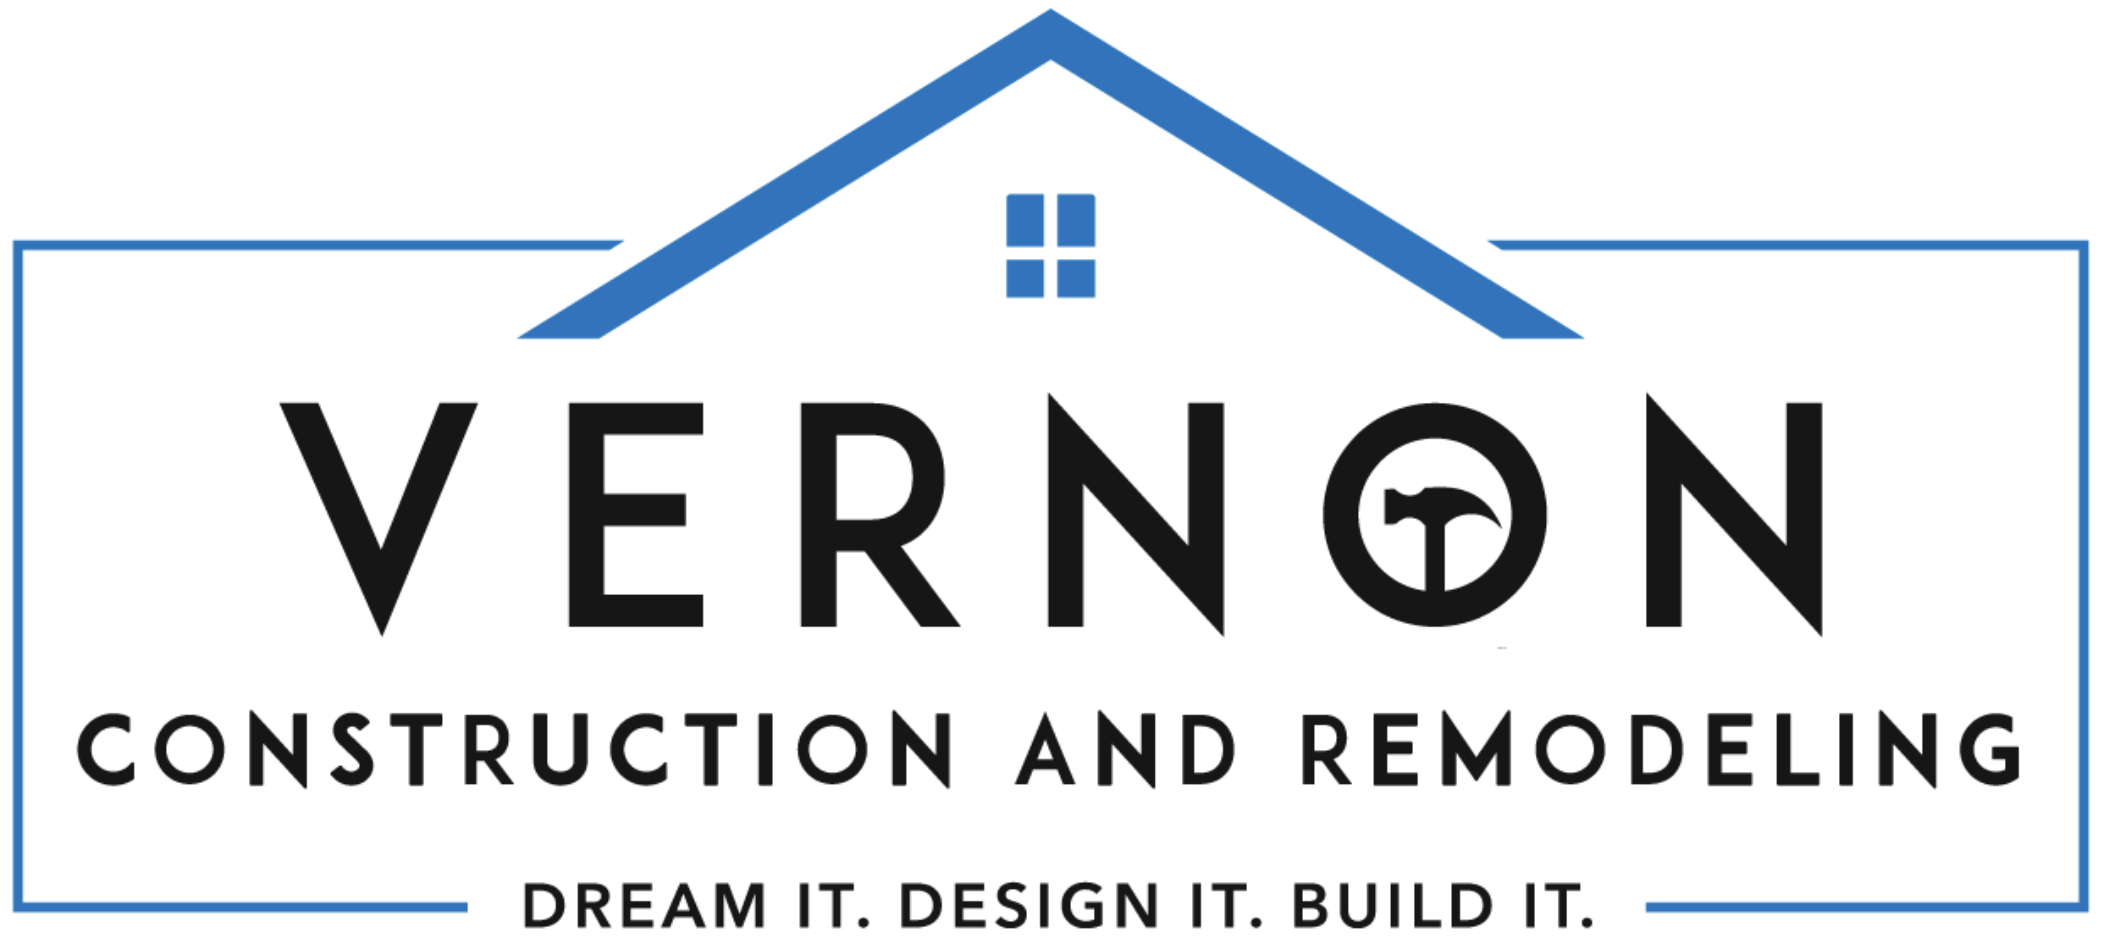 Vernon Construction and Remodeling